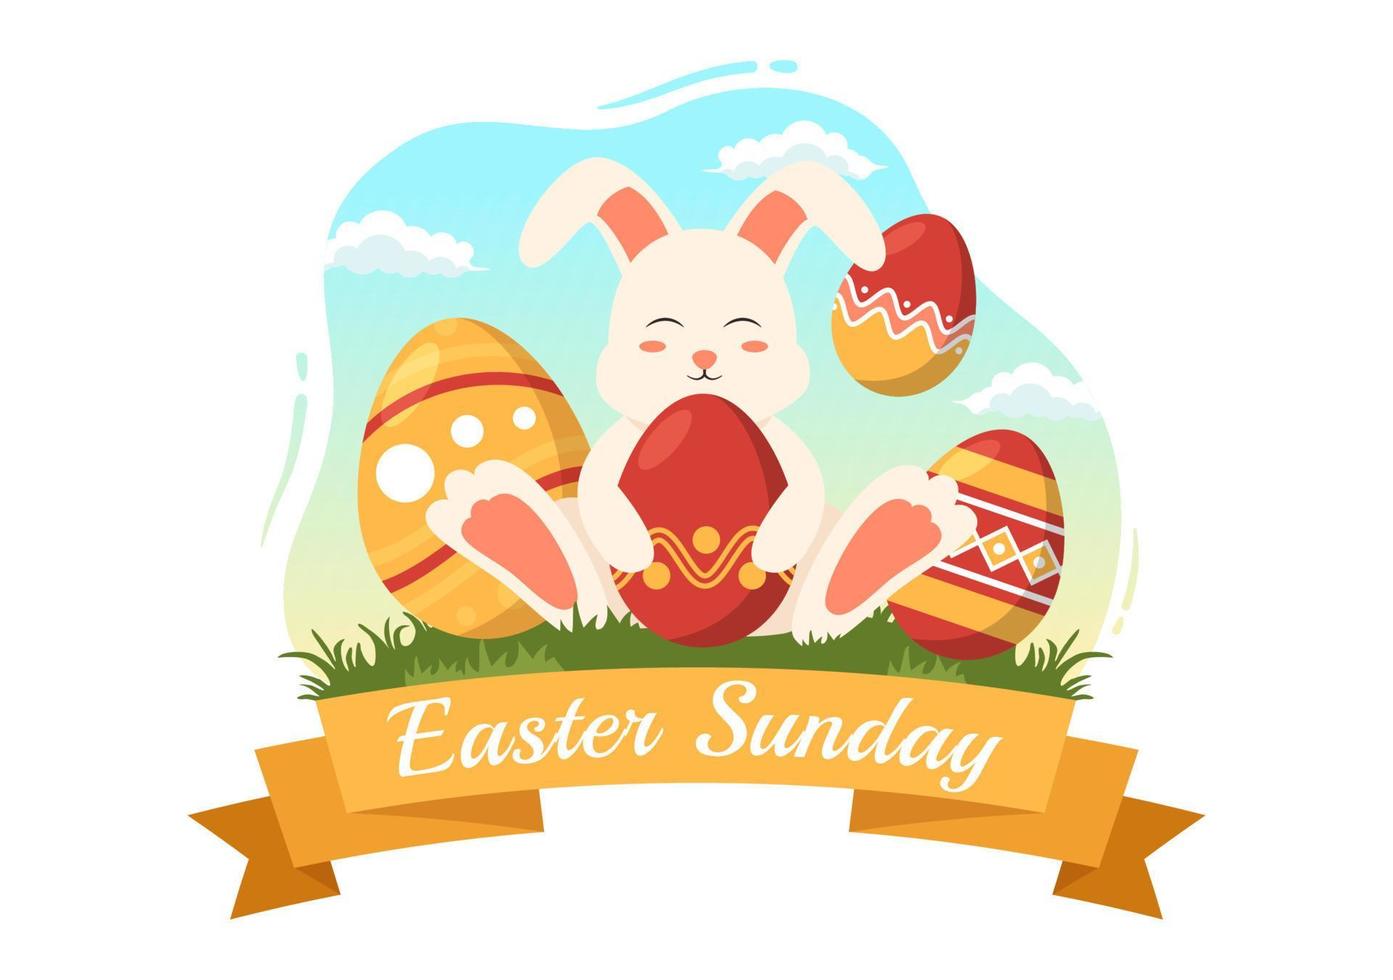 Happy Easter Sunday Day Illustration with Colorful Painted Eggs and Cute Bunny for Web Banner or Landing Page in  Hand Drawn Templates vector